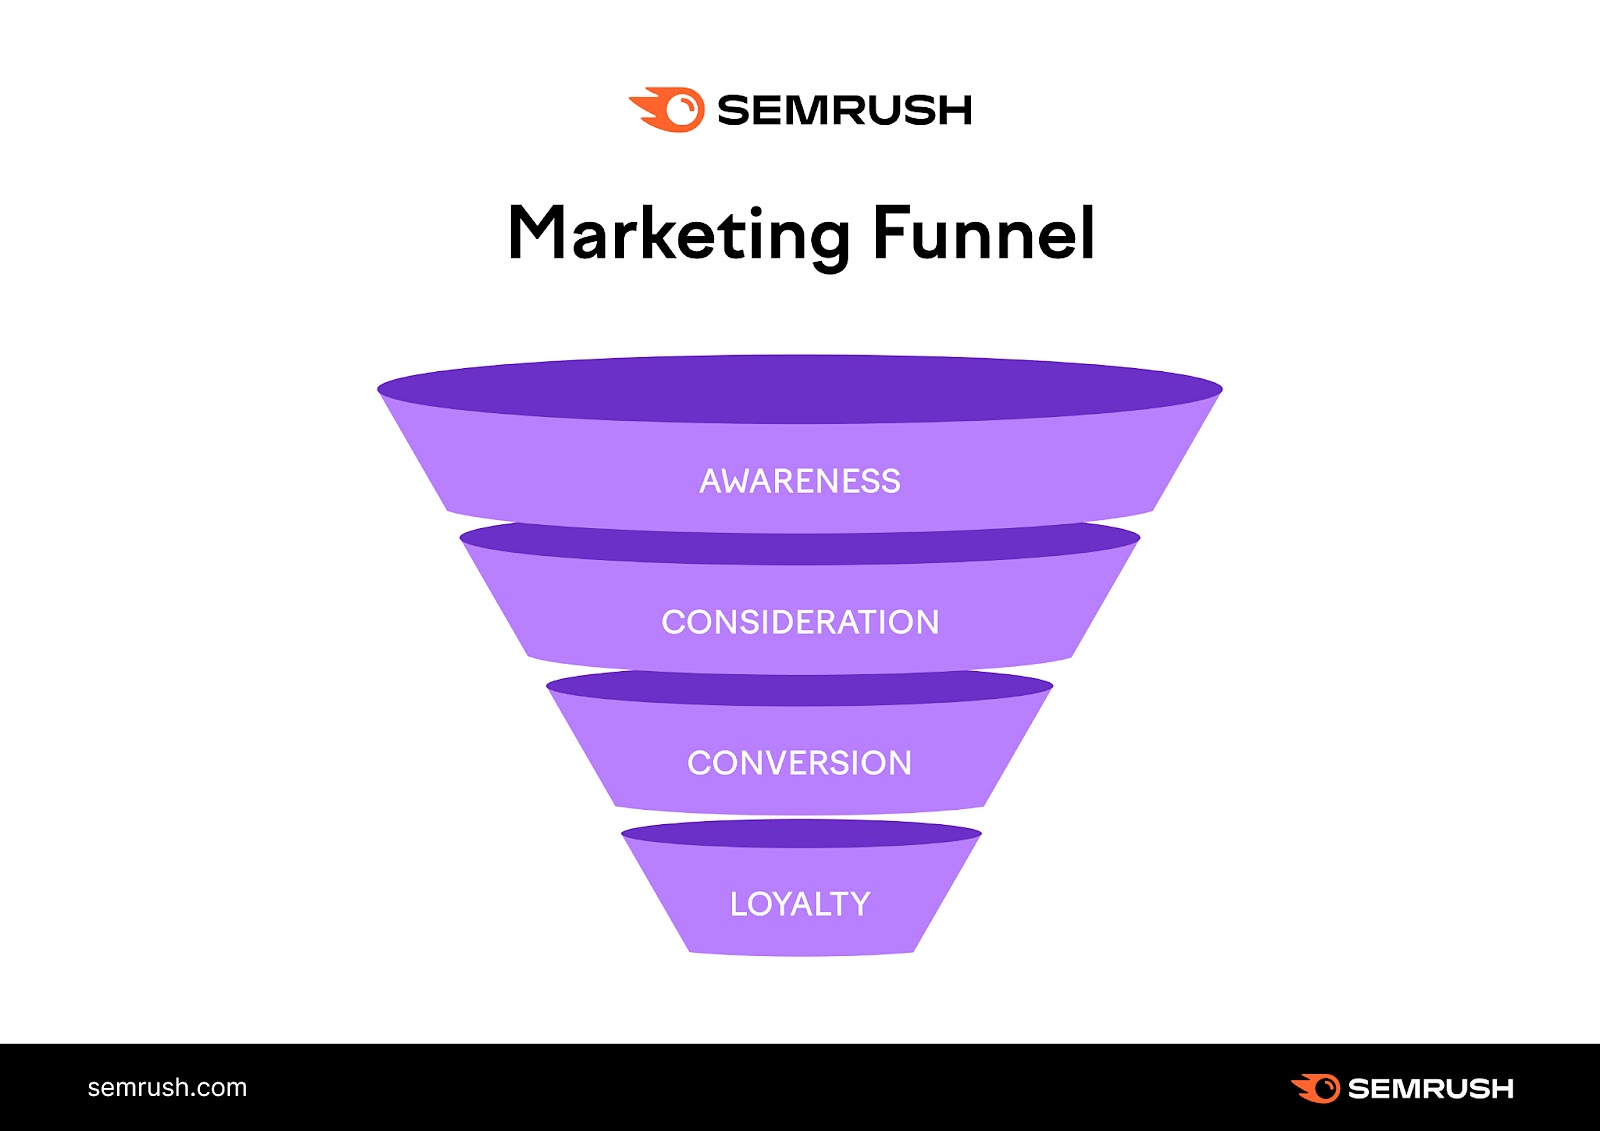 Marketing funnel, with awareness, consideration, conversion, and loyalty stages